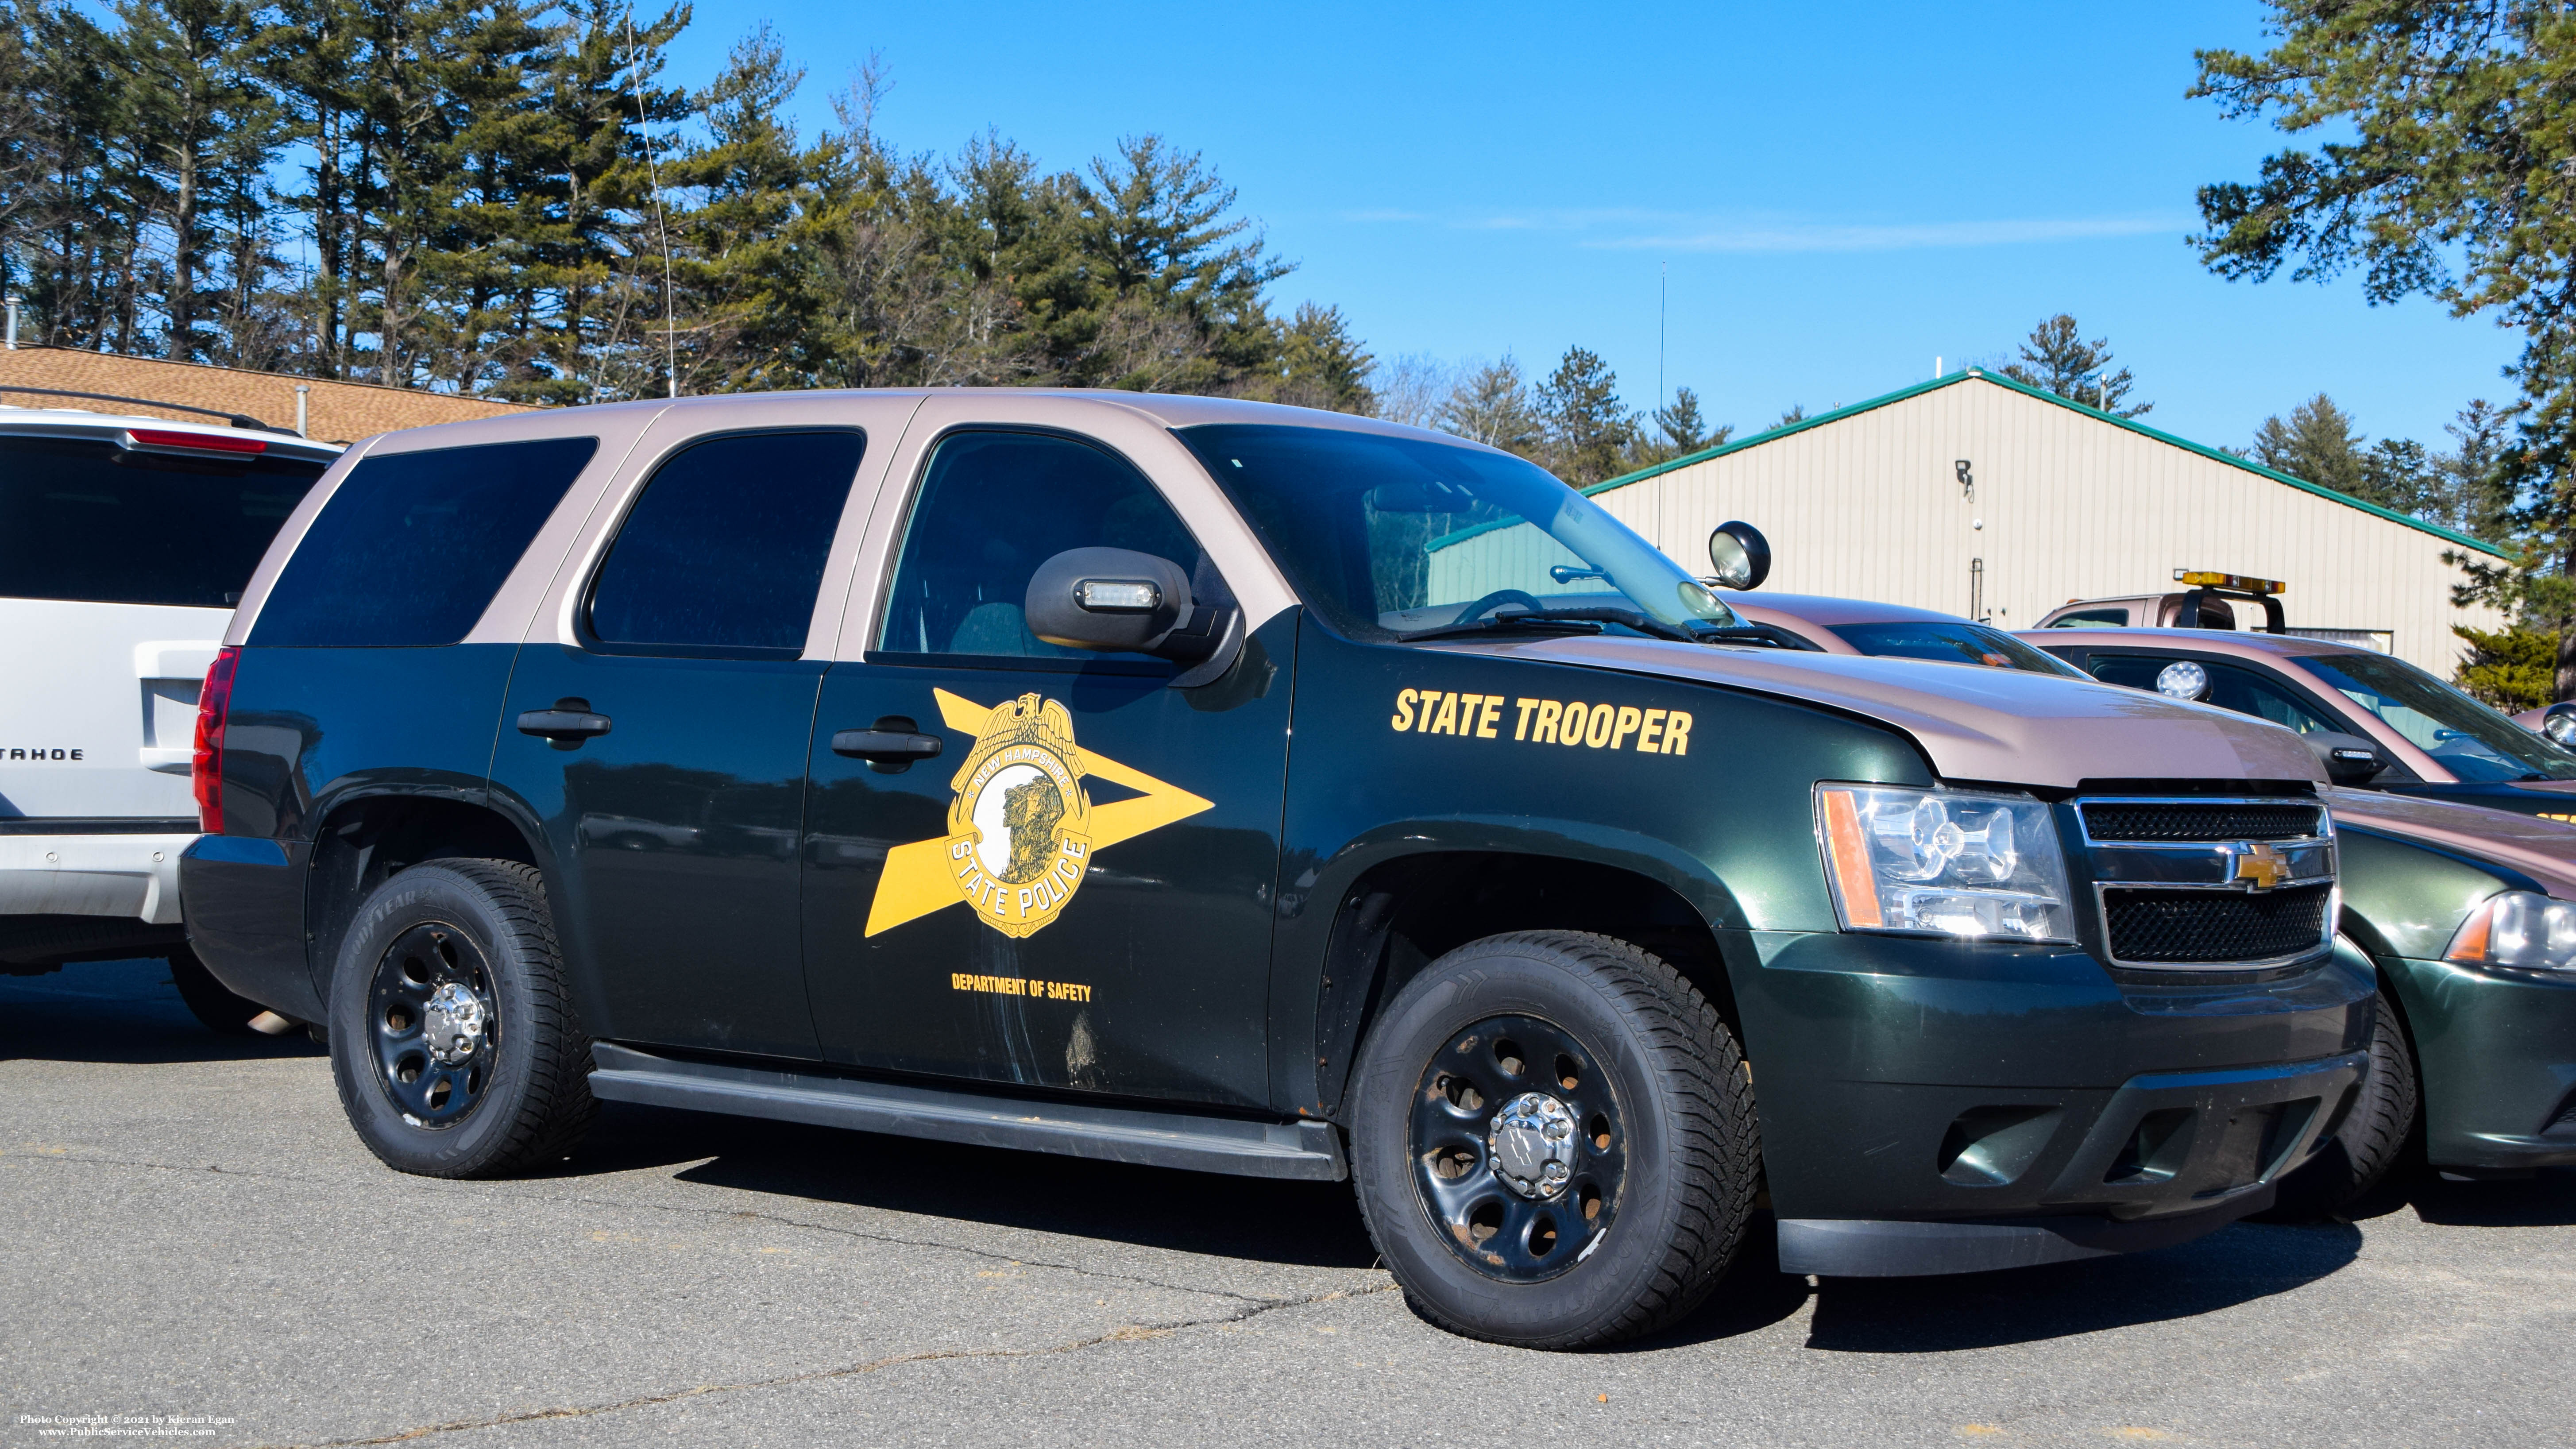 A photo  of New Hampshire State Police
            Unassigned Cruiser, a 2007-2013 Chevrolet Tahoe             taken by Kieran Egan